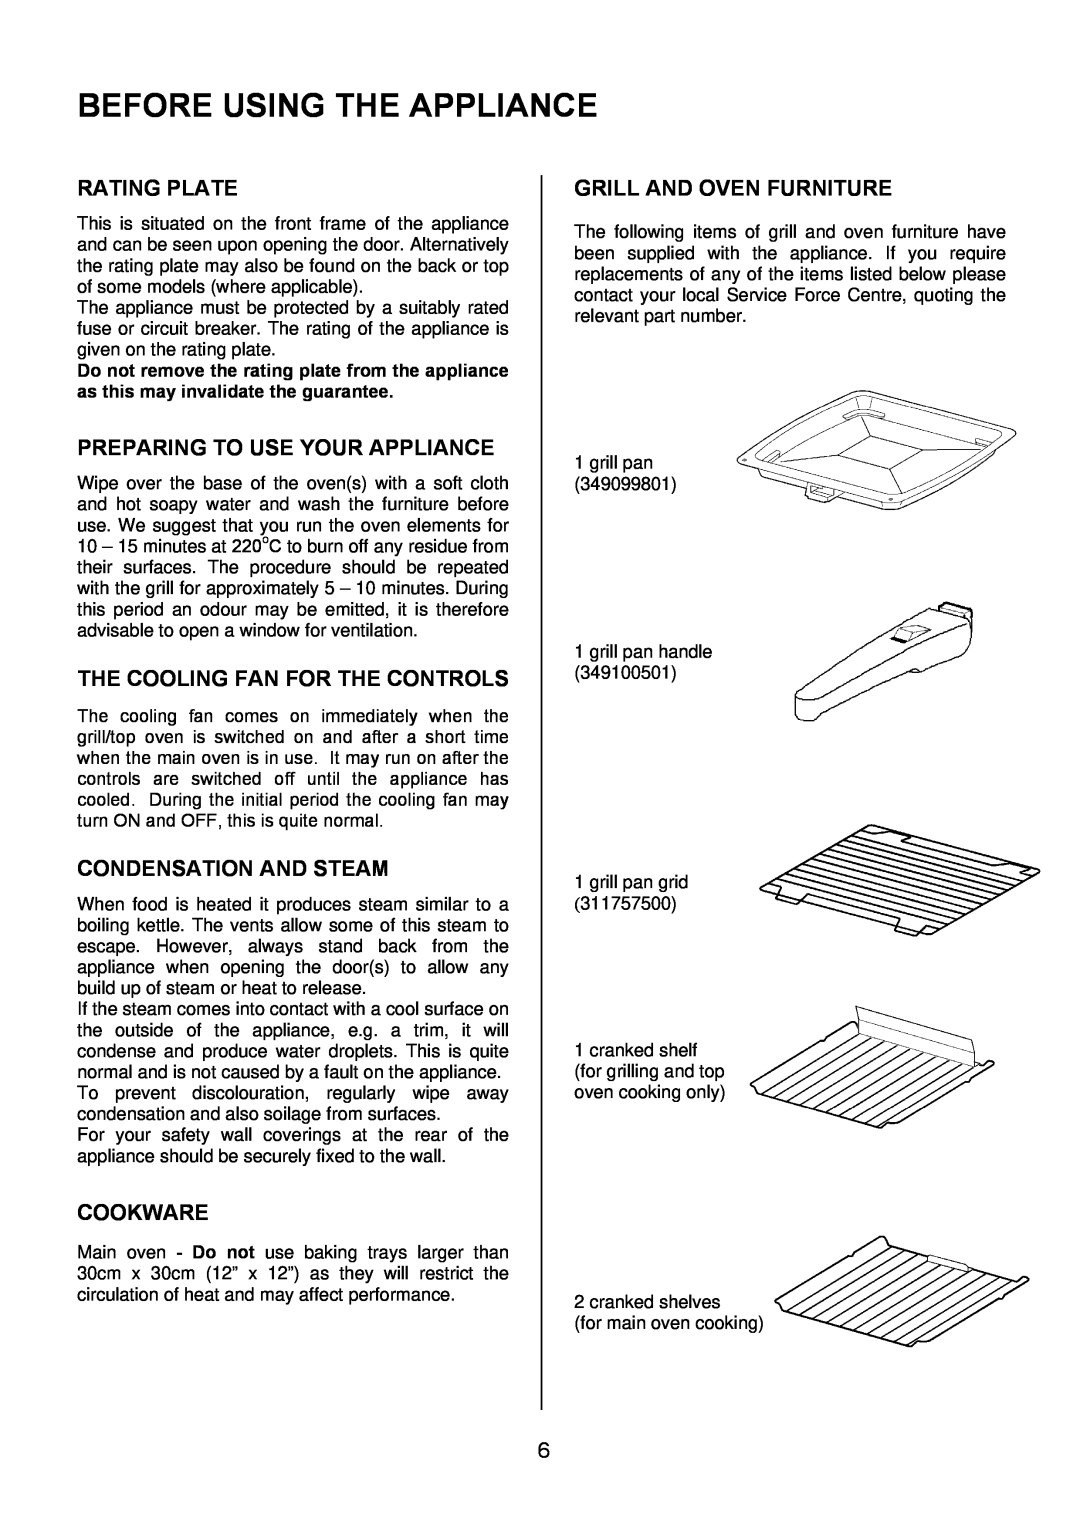 Electrolux EKG6046/EKG6047 manual Before Using The Appliance, Rating Plate, Preparing To Use Your Appliance, Cookware 